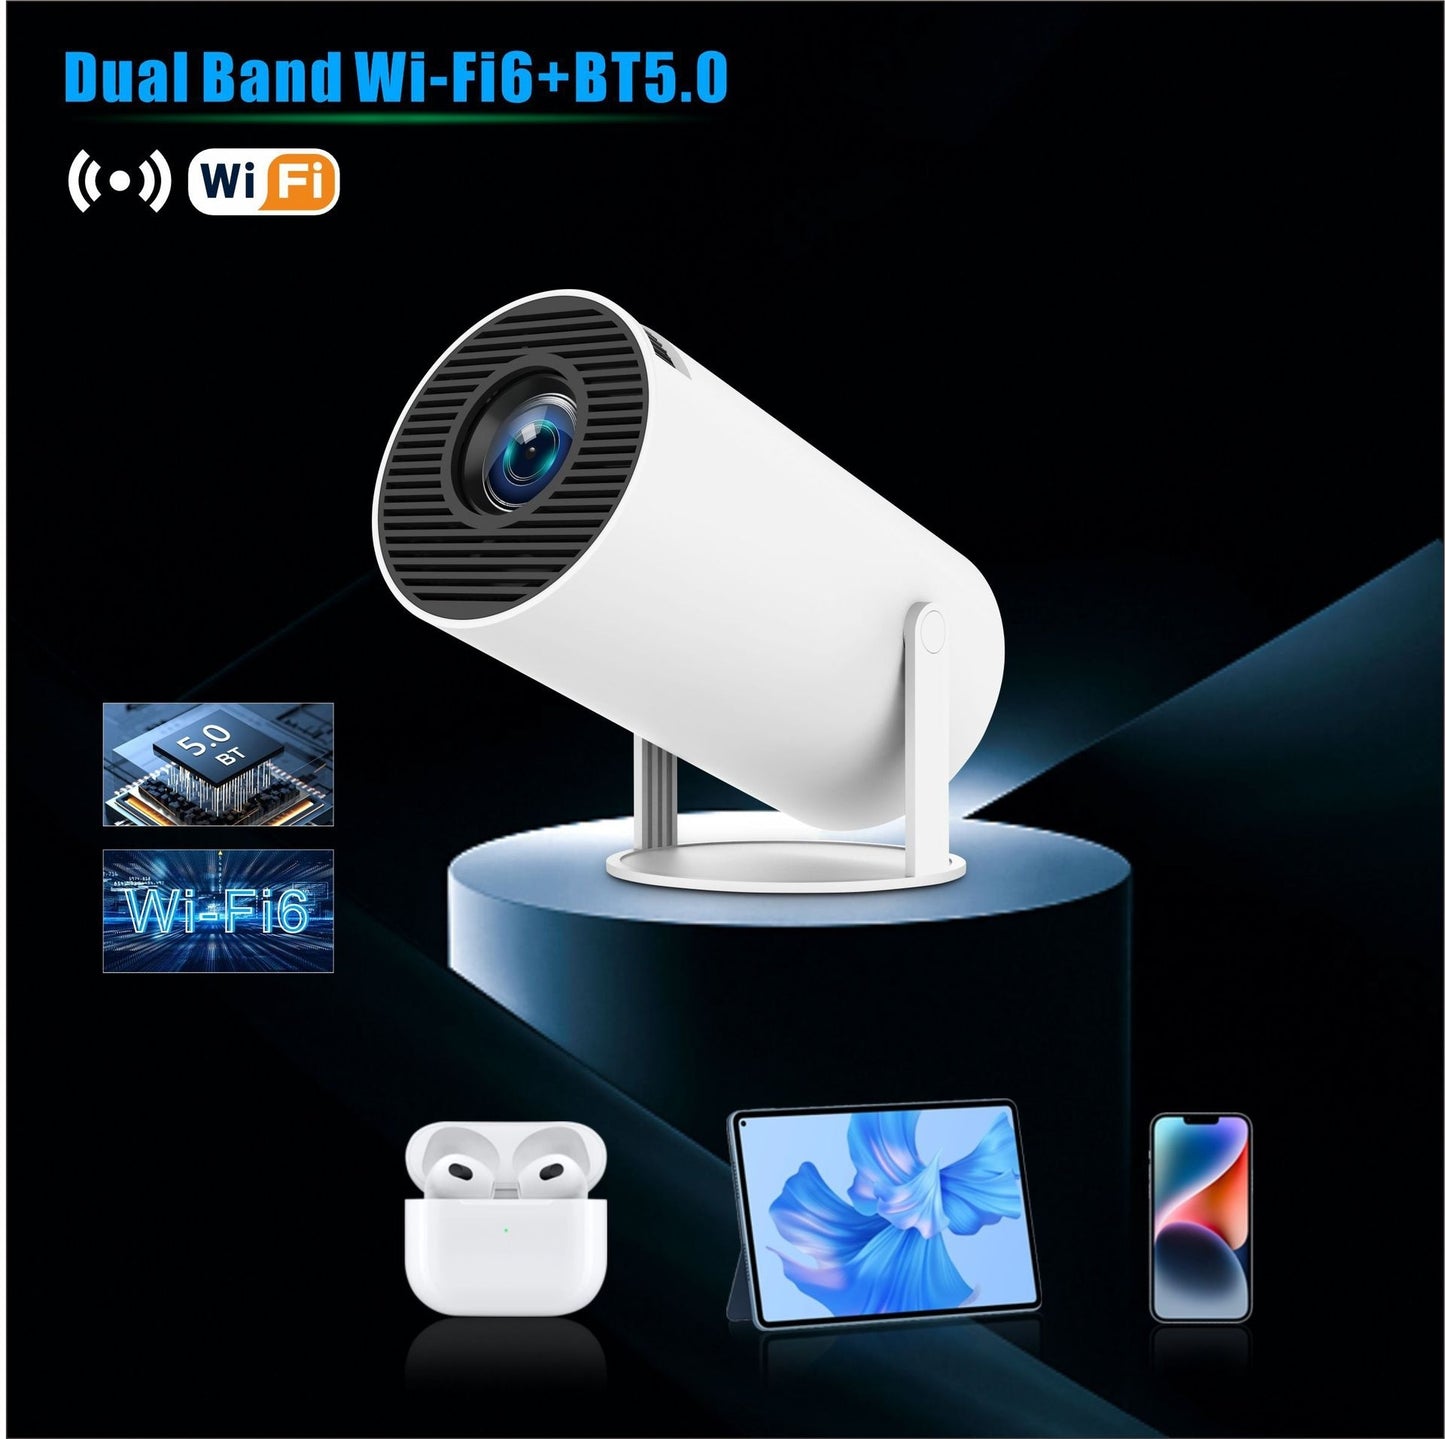 HY300 Pro Projector